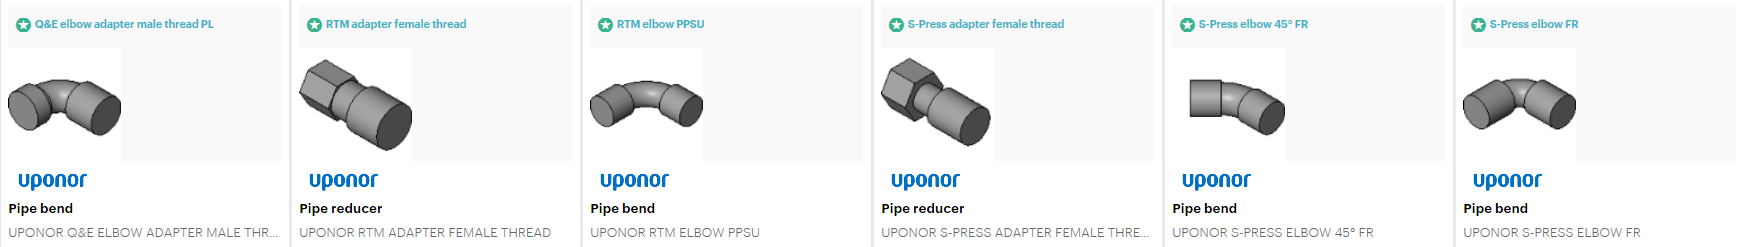 pipes-uponor